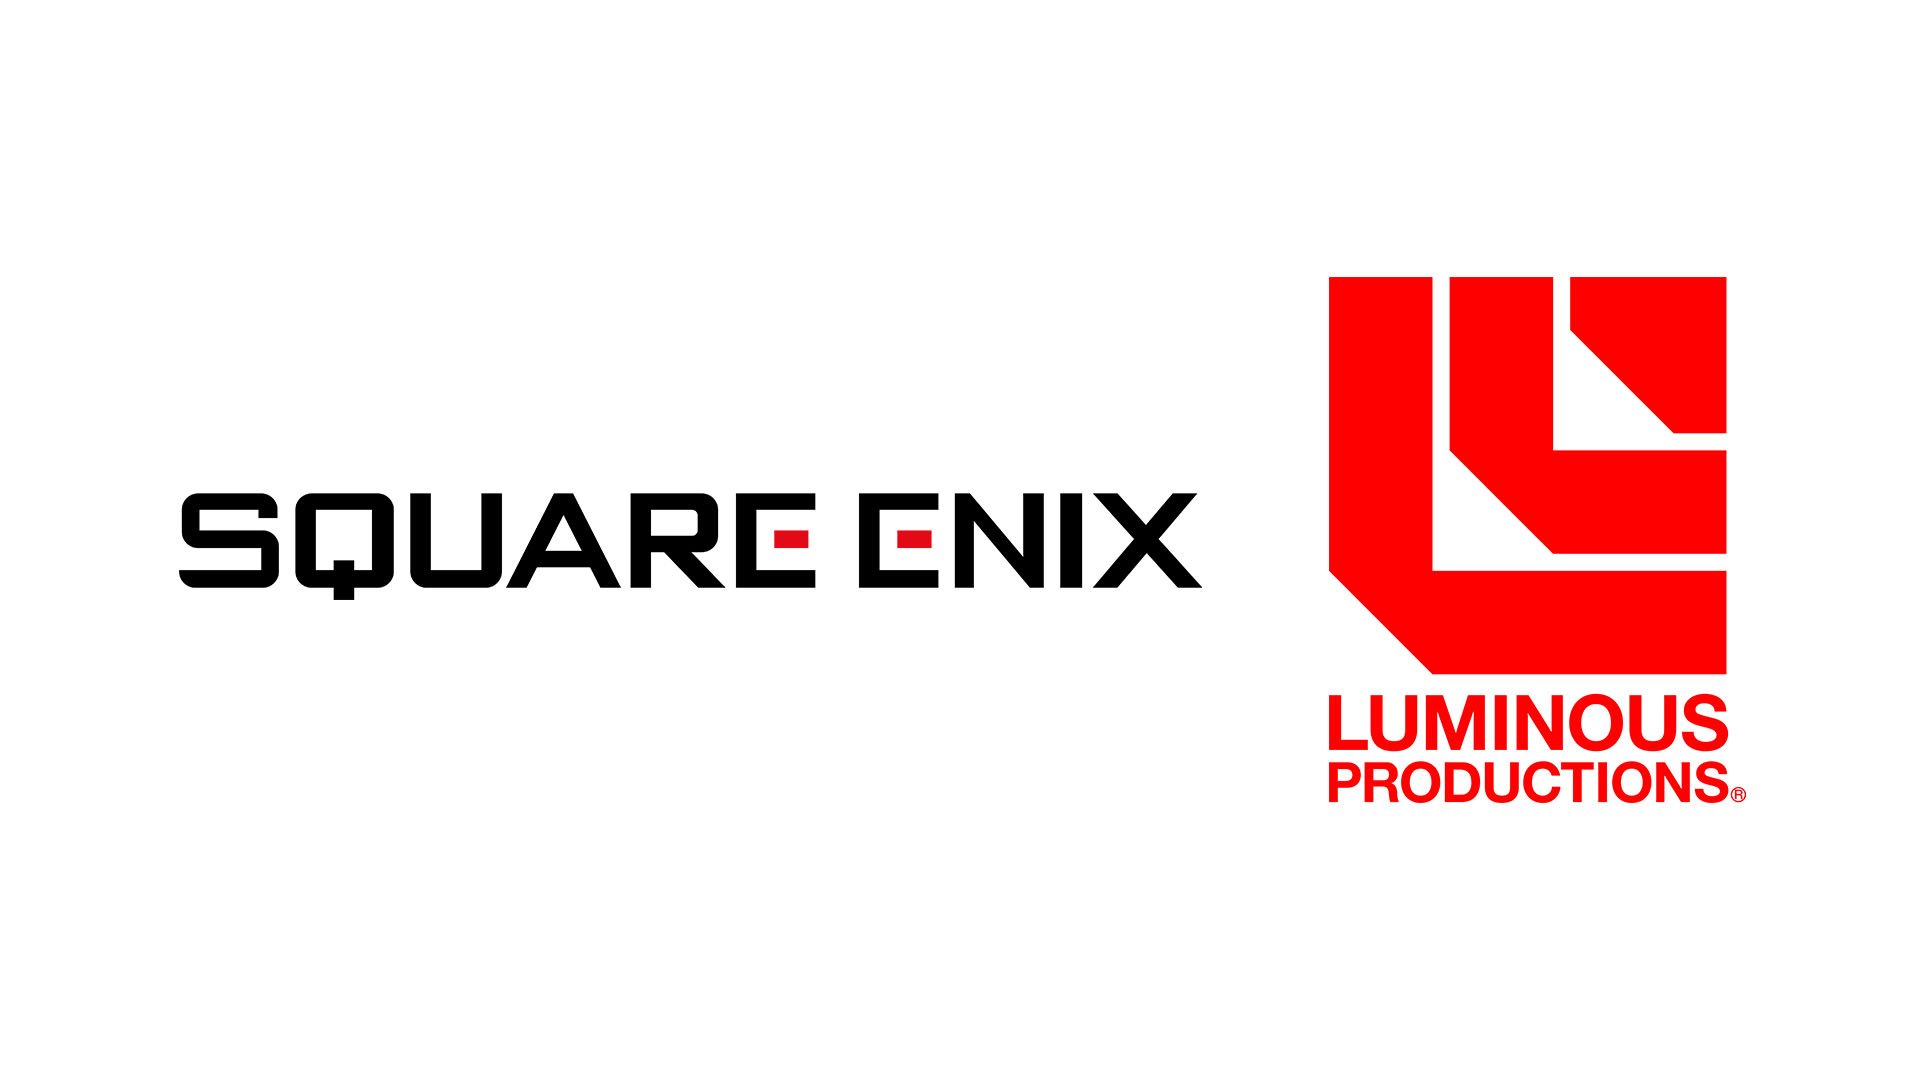 #
      Luminous Productions to merge with Square Enix on May 1